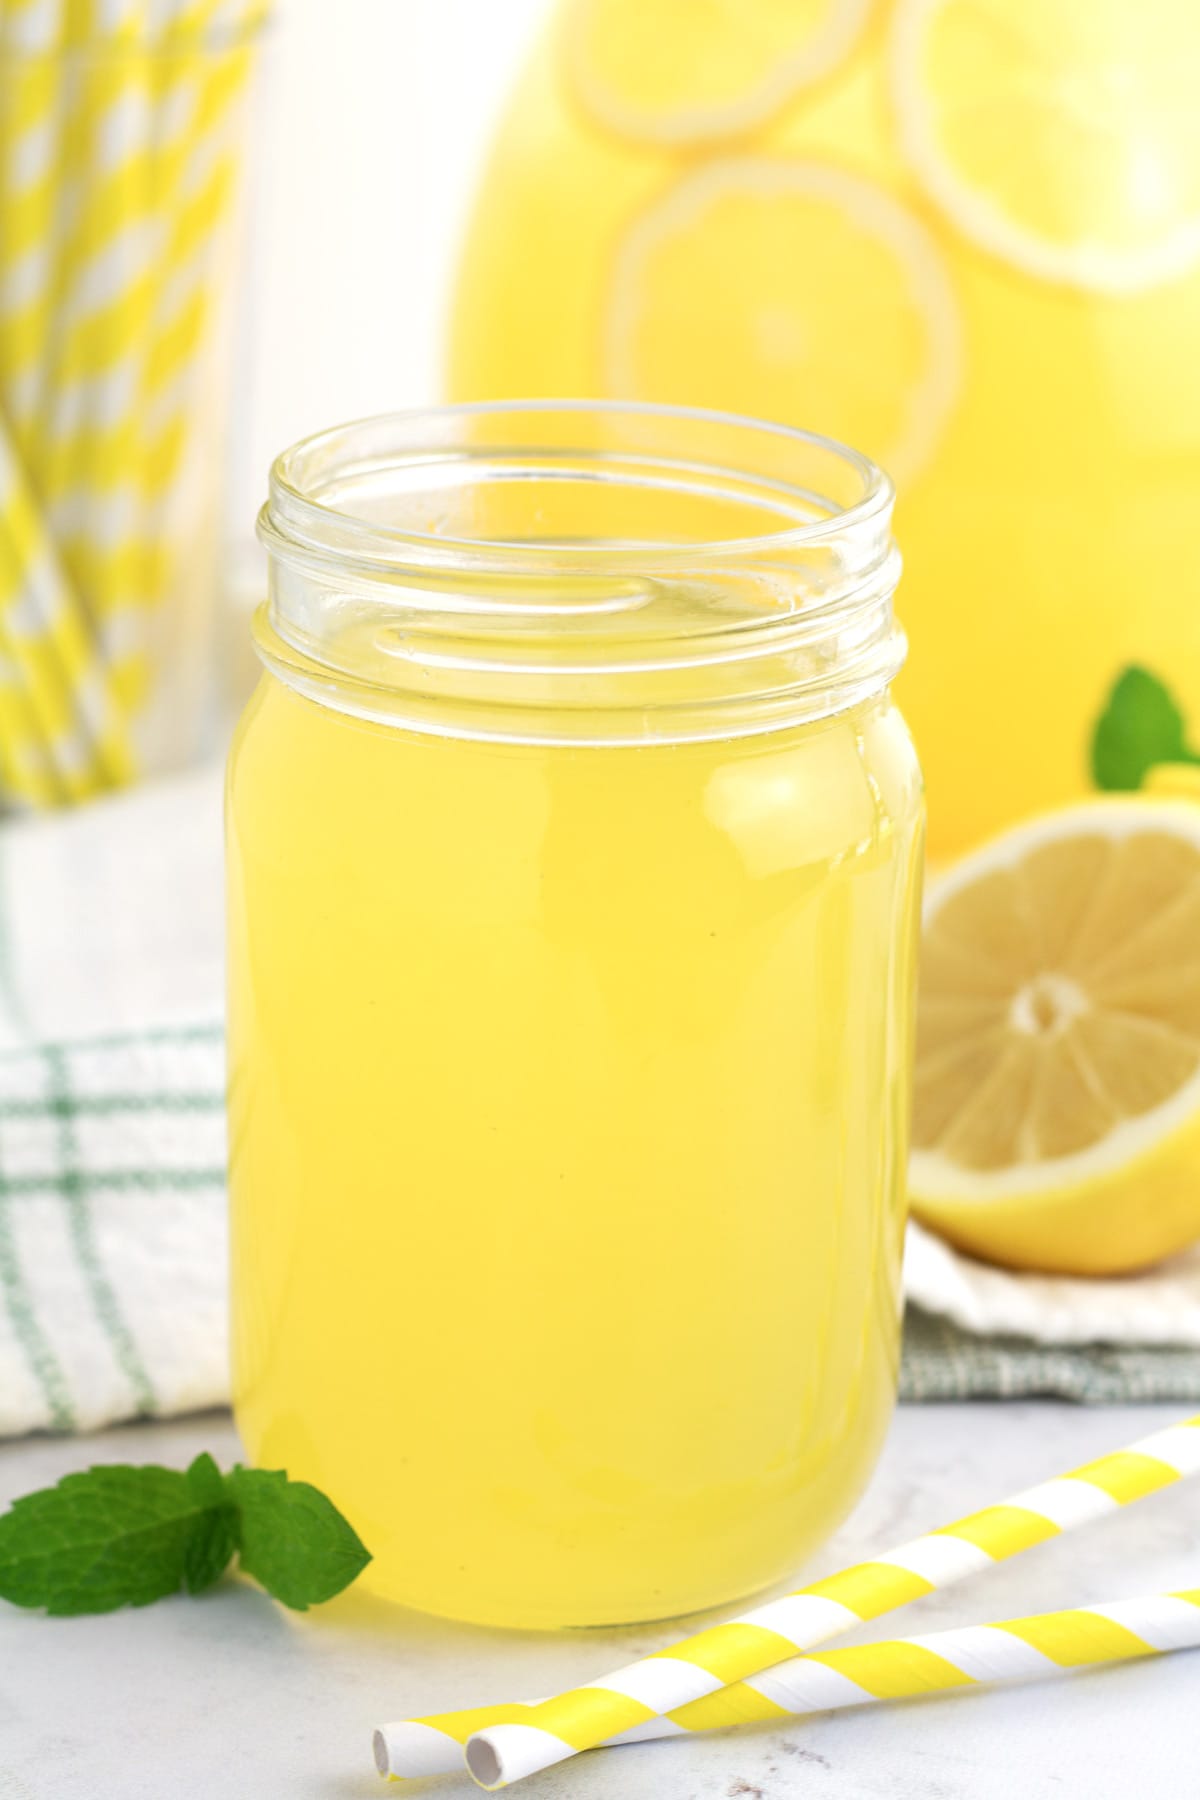 Clear glass jar of yellow lemonade concentrate with yellow straws laying beside it.